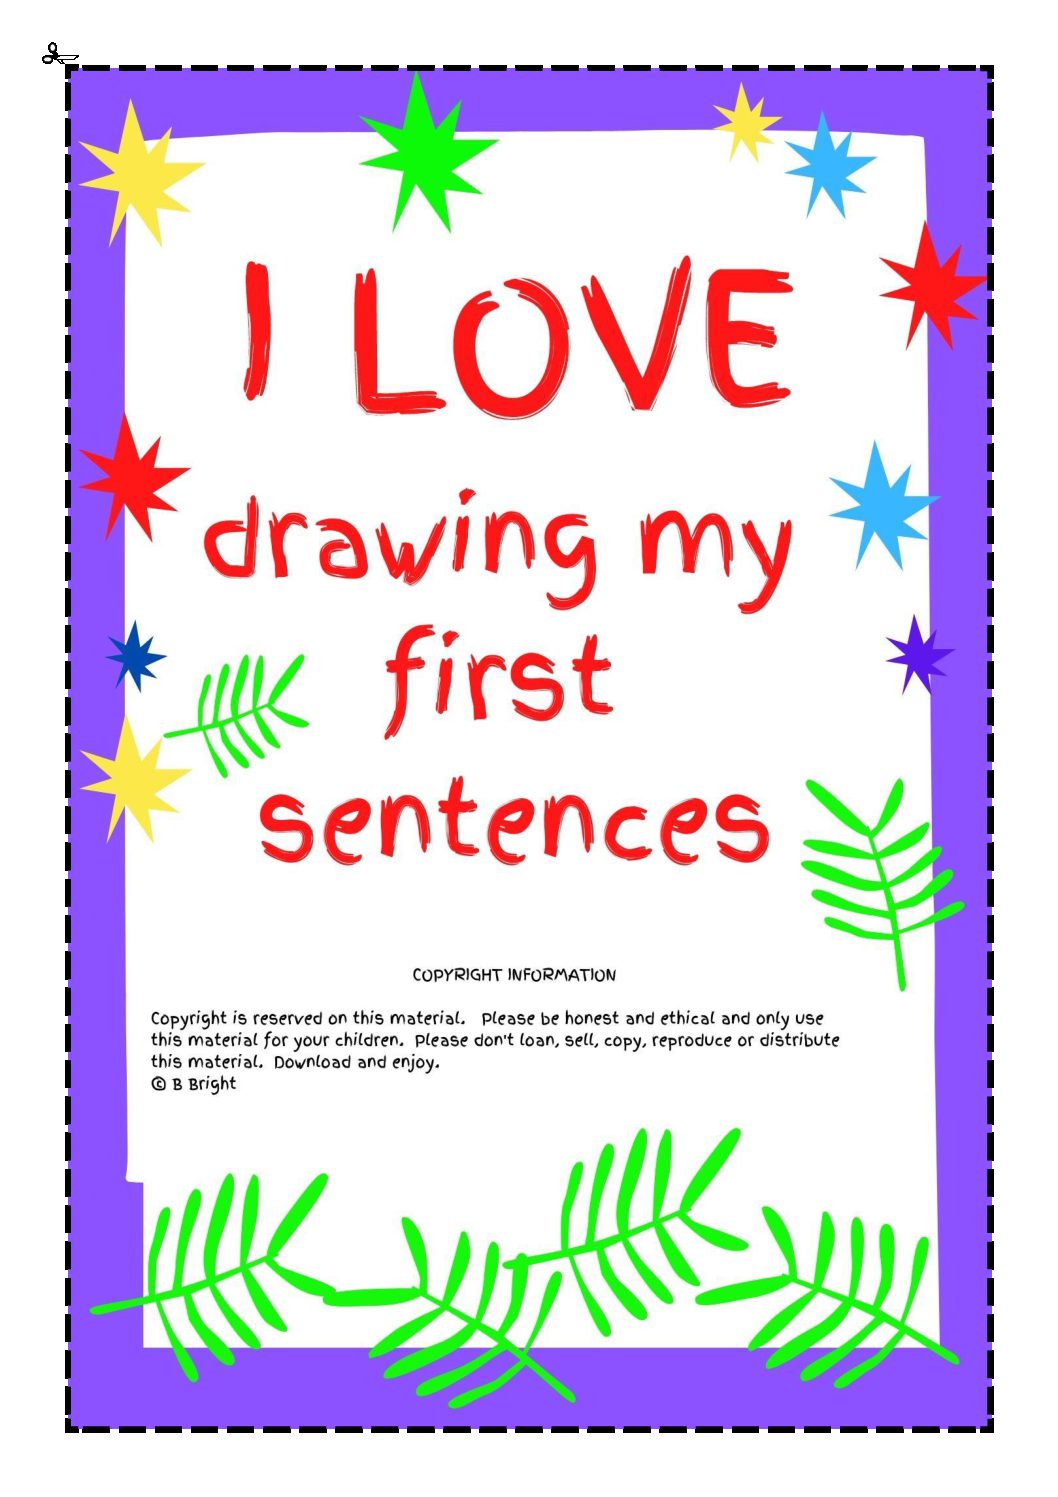 I LOVE DRAWING MY FIRST SENTENCES cover page